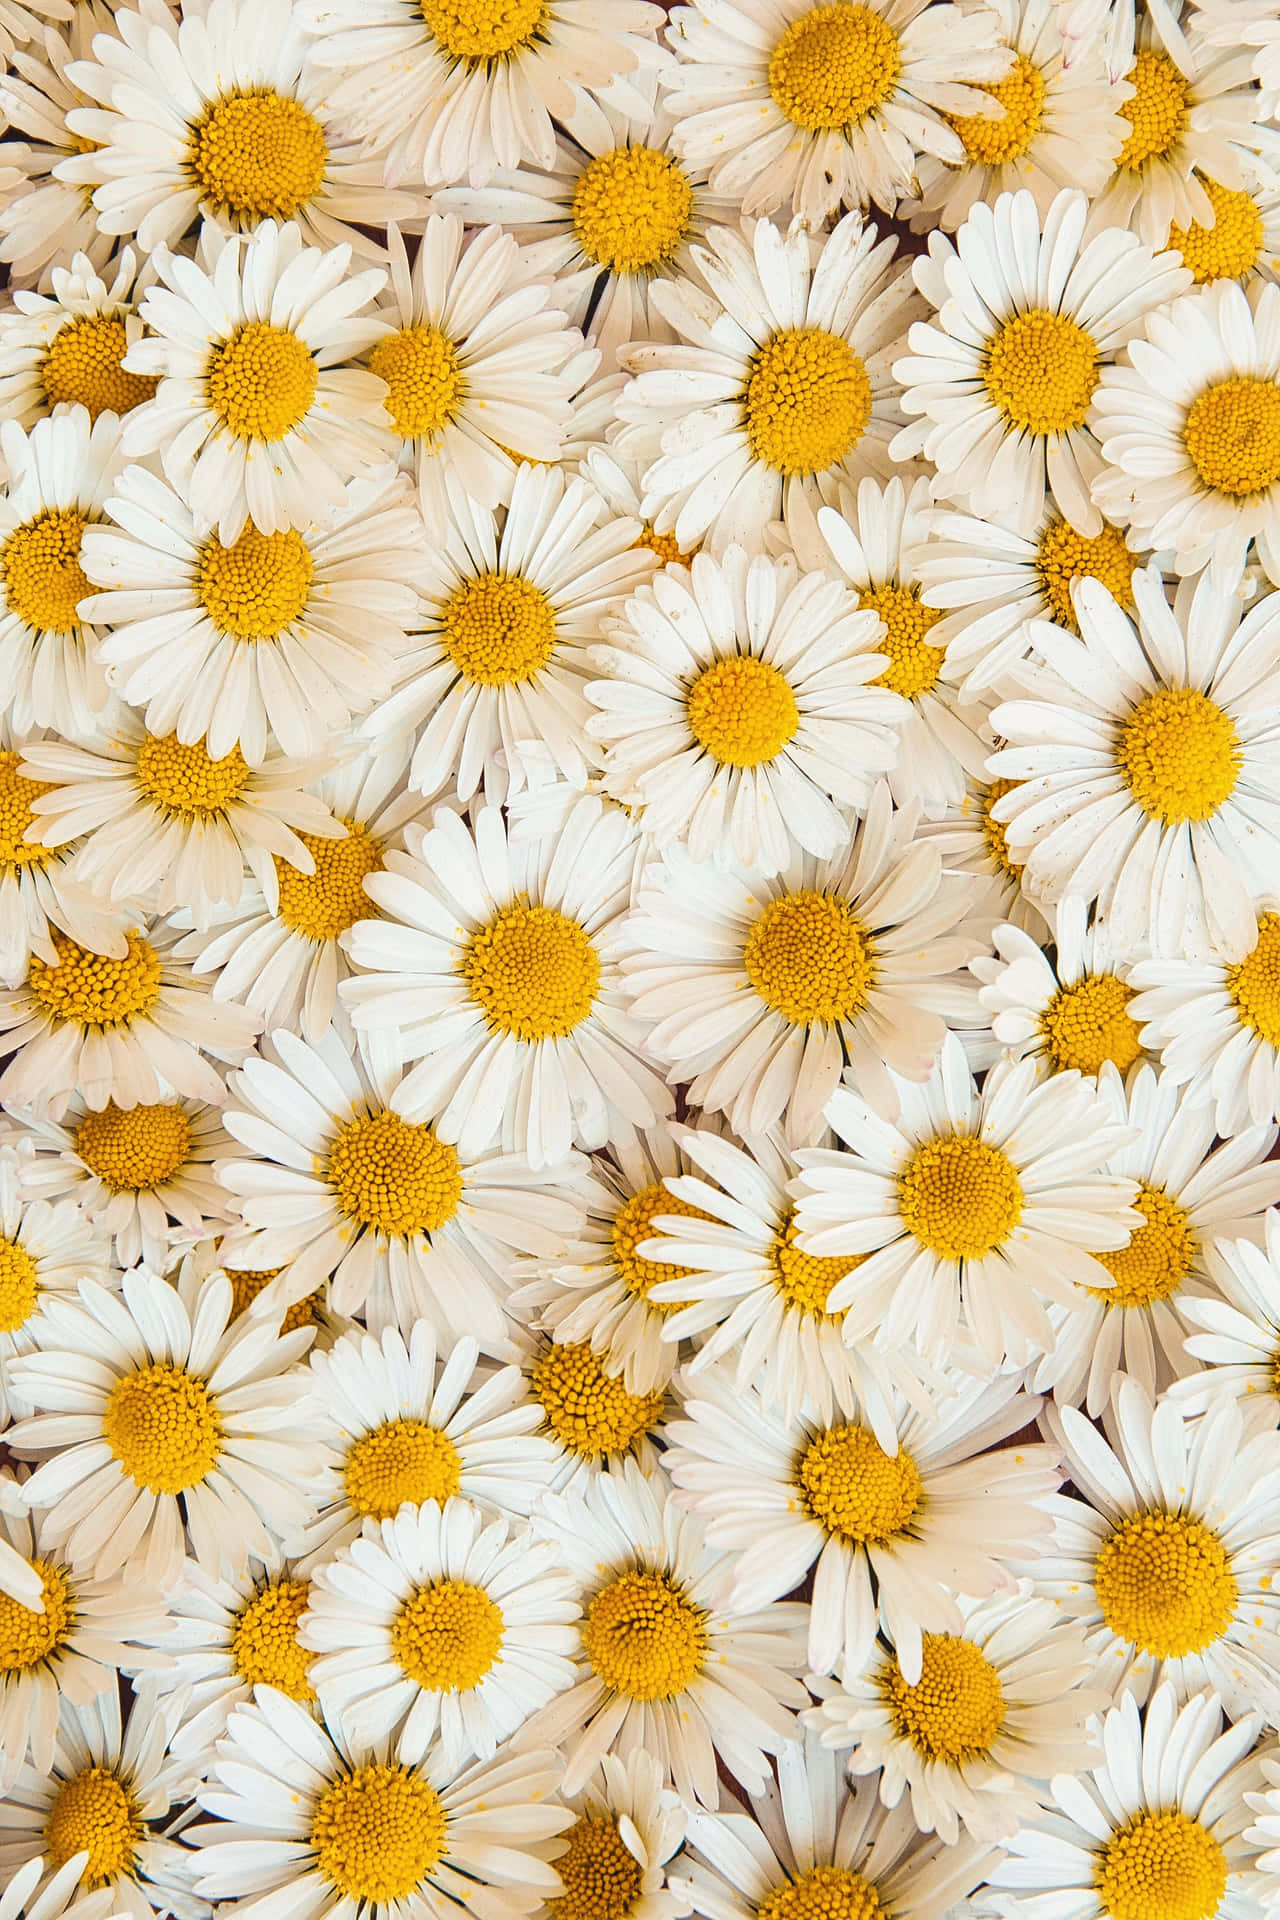 Top View Daisies Background